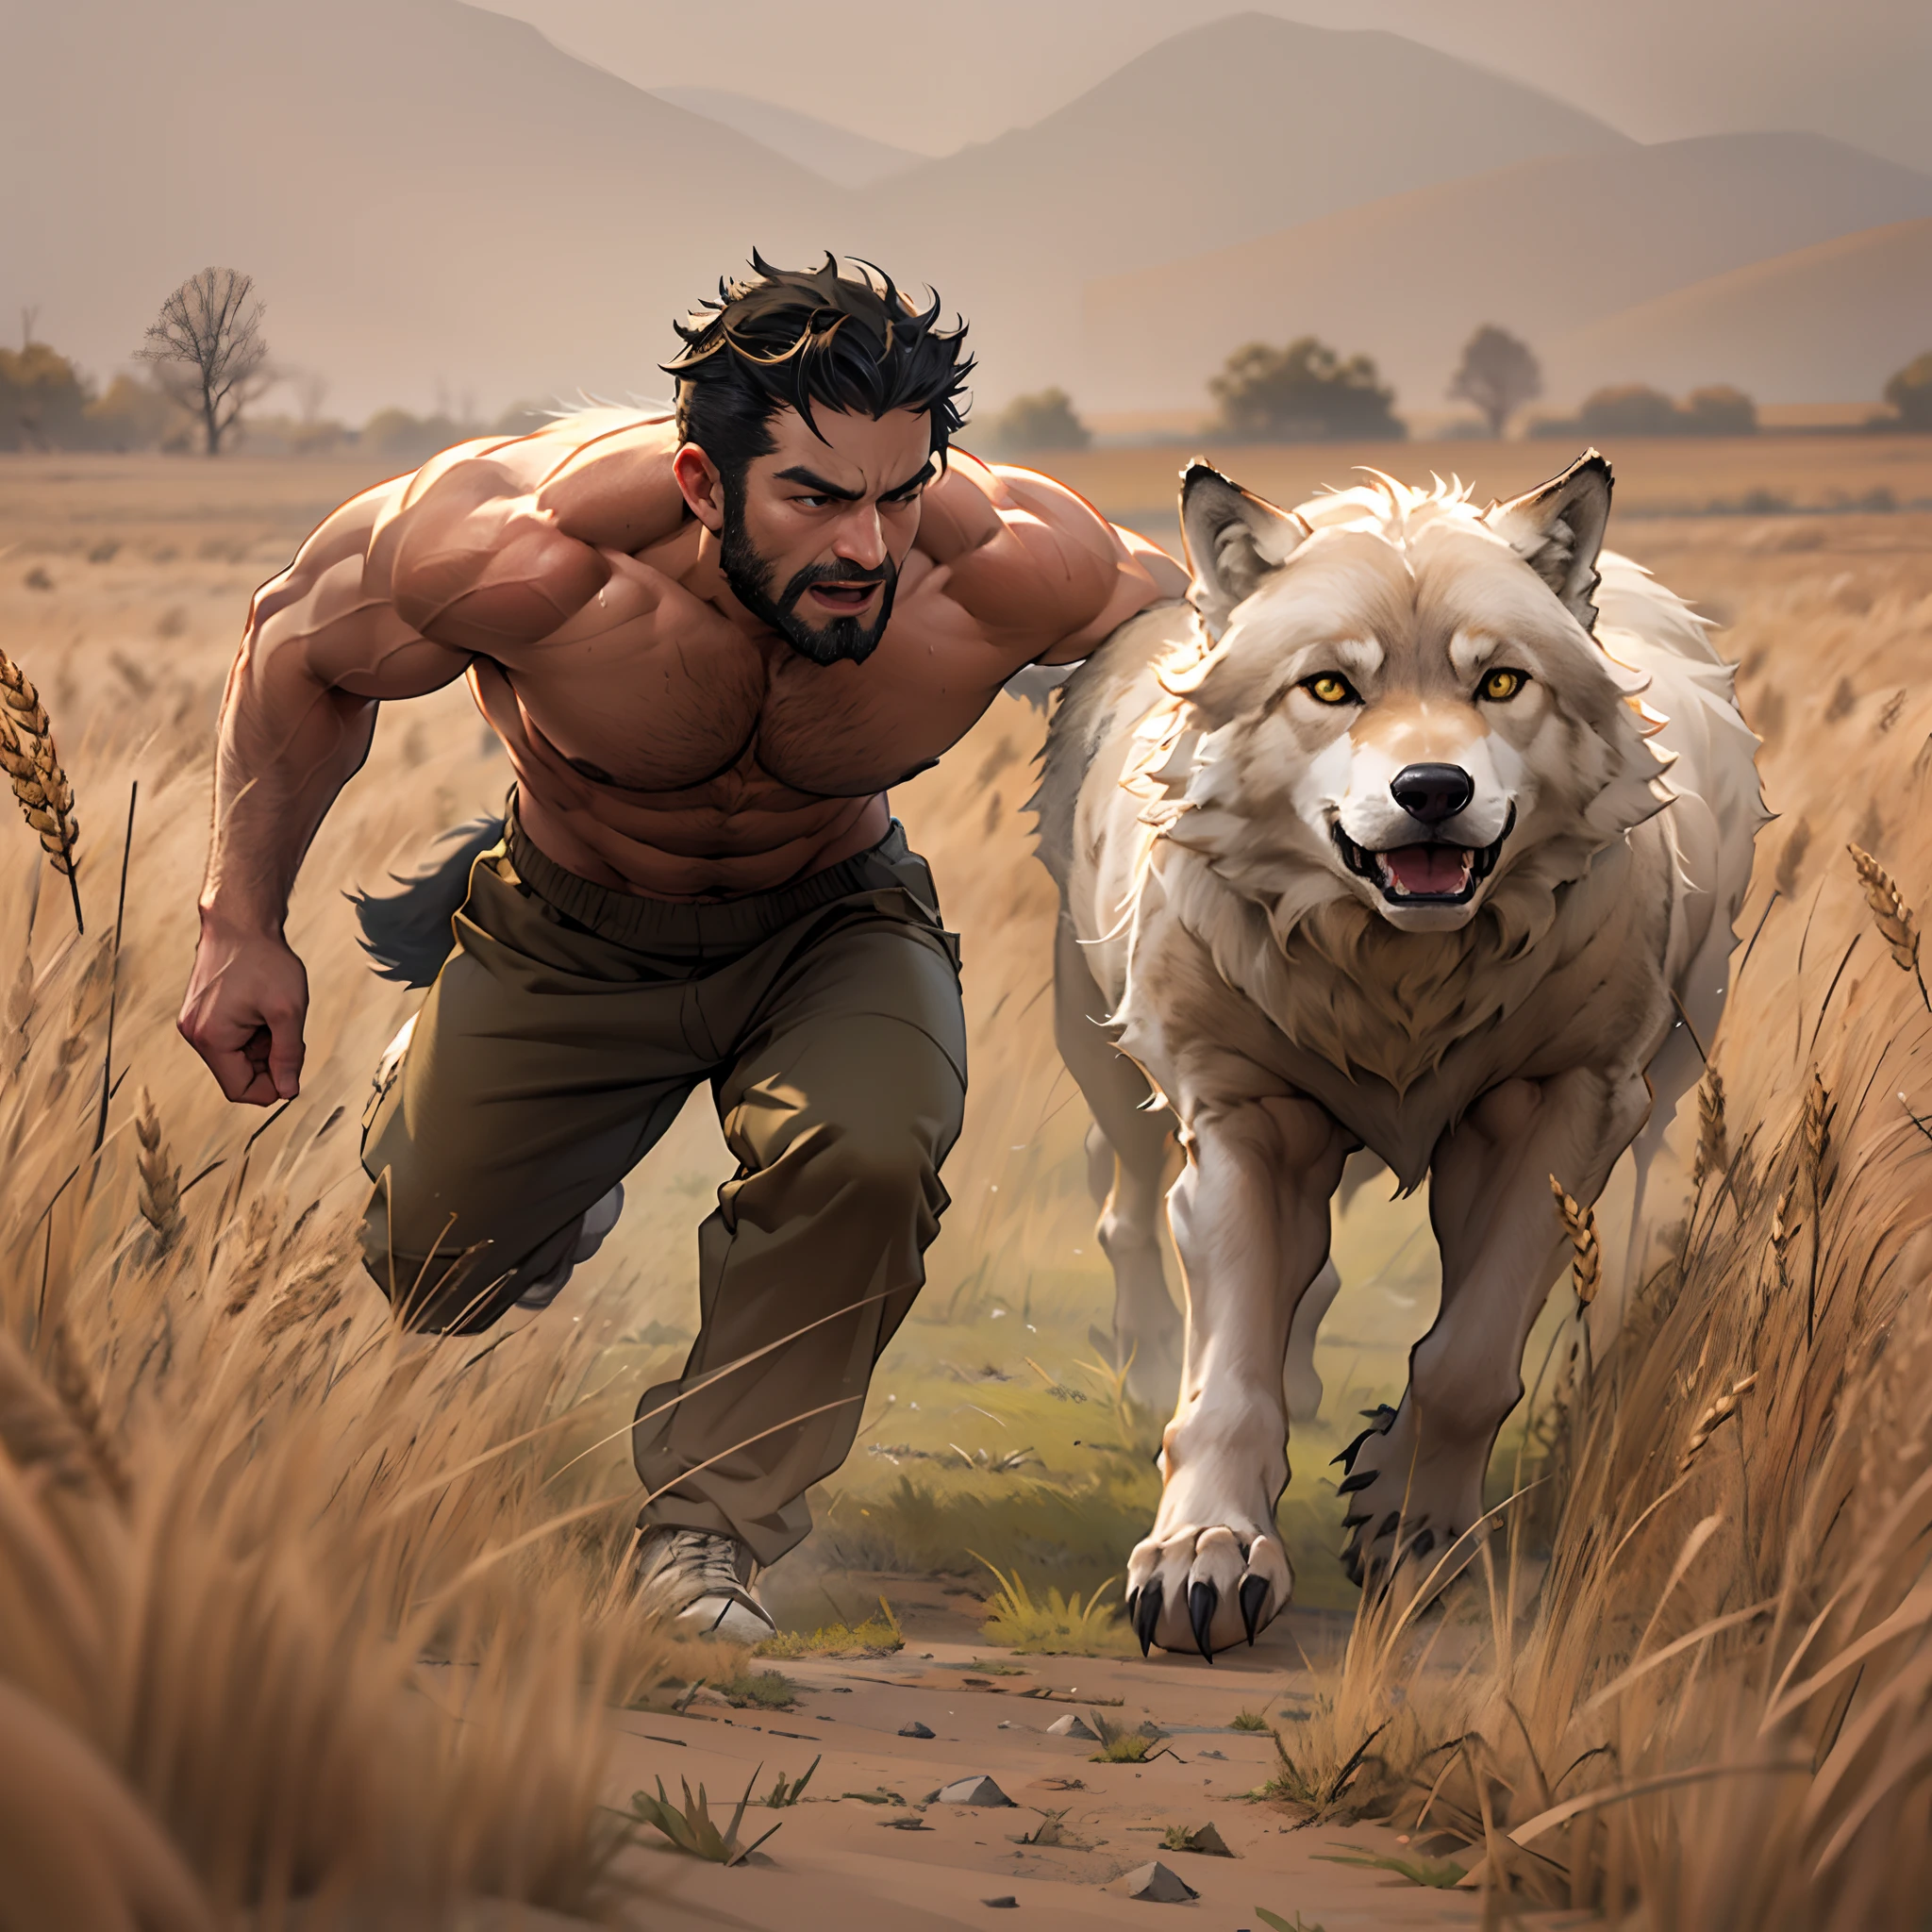 30 years old, Male, Fully naked, stubbles, Huge muscles, Mature man, Muscle swelling, Bodybuilding, chest muscles, Abs, Natural light, Wheat-colored skin, 1人, Wolverine, Naked, werecreature, Predators and prey, Hunting, Run through empty fields, Side view, Wolves as pets, Men have wolf ears, Displays a side view of the whole body, The wolf cub is following the man, wide - angle shot, Best quality, Highly detailed, Chase sheep, Frightened sheep